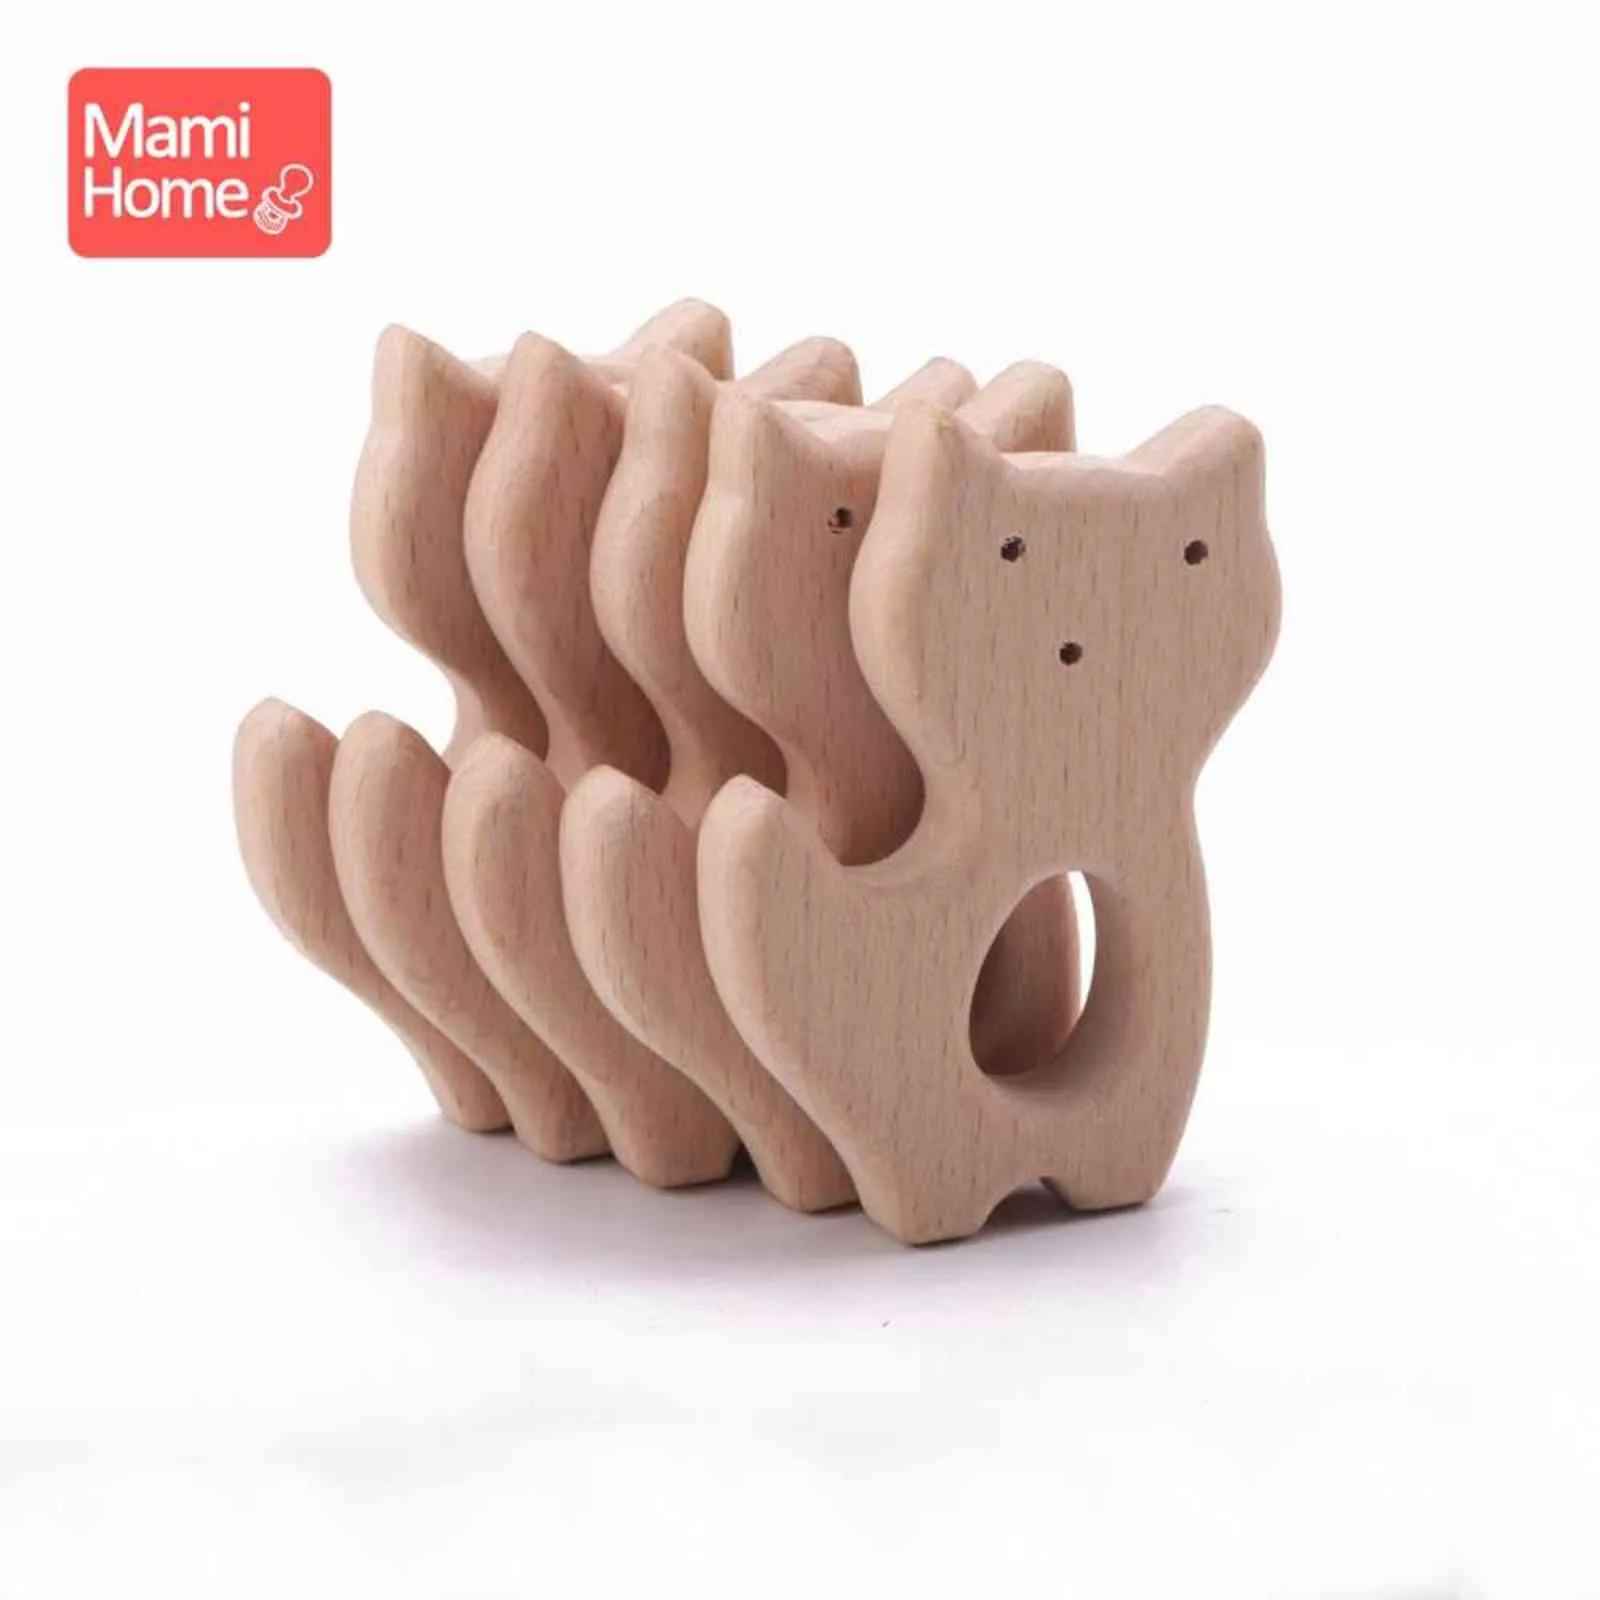 Baby Wooden Teether Animal Beech Pacifier Pendant BPA Free Wood Teeth Blank Rodent Teether Toy Nursing Gift Children's Good 211102